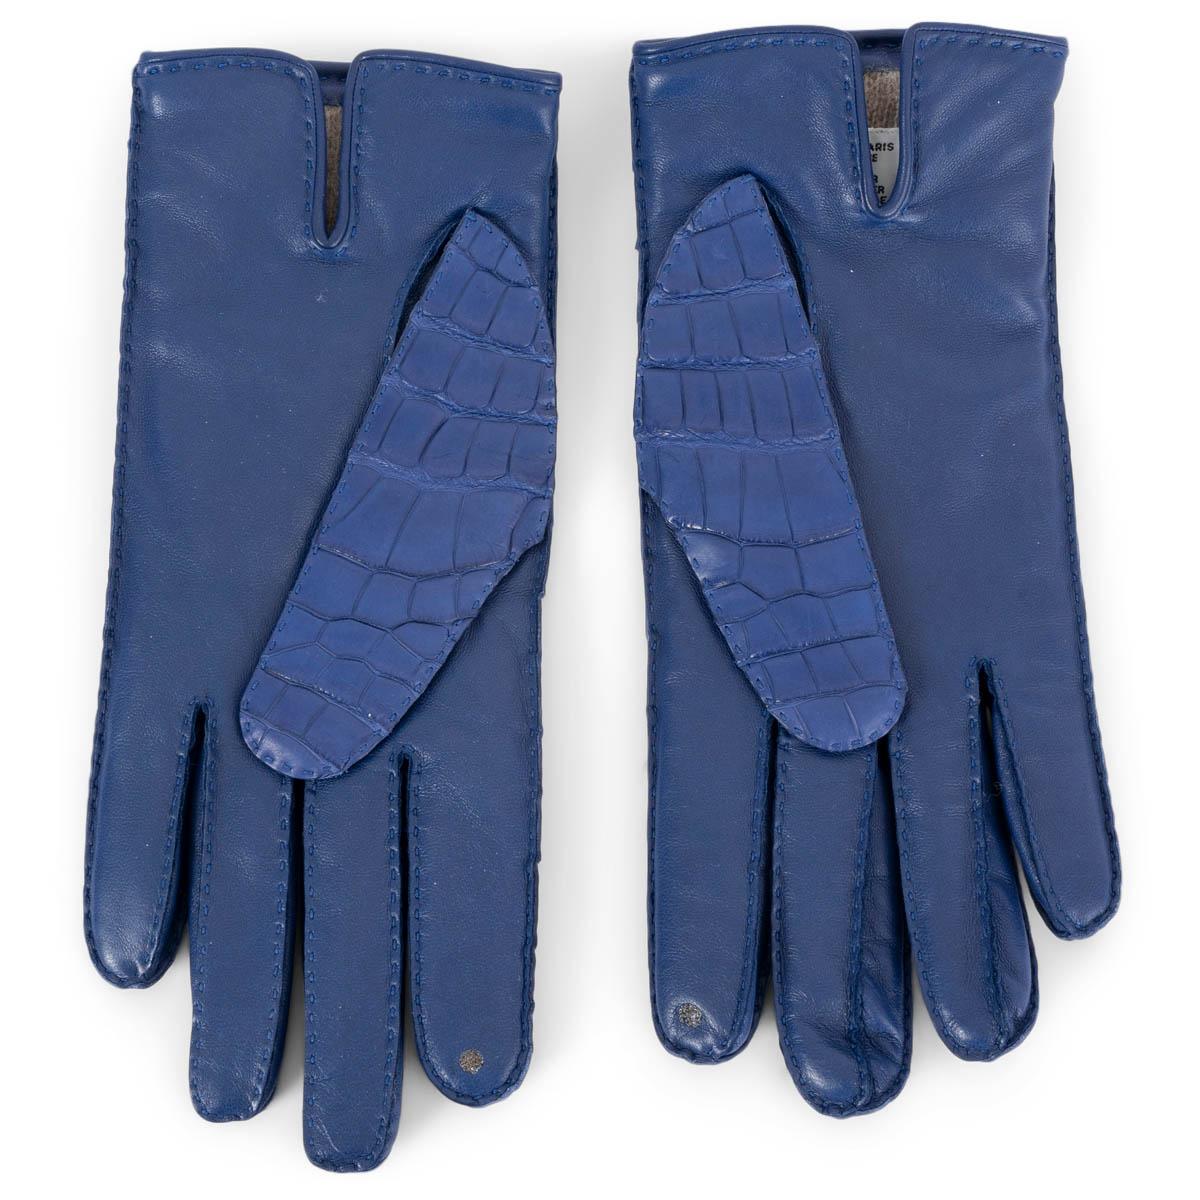 100% authentic Hermès Soya Kelly Lock gloves in Bleu Electrique blue matte alligator. Features smart phone compatible index finger and taupe cashmere (100%) lining. Have been worn and are in excellent condition. 

Measurements
Size	7.5
Tag